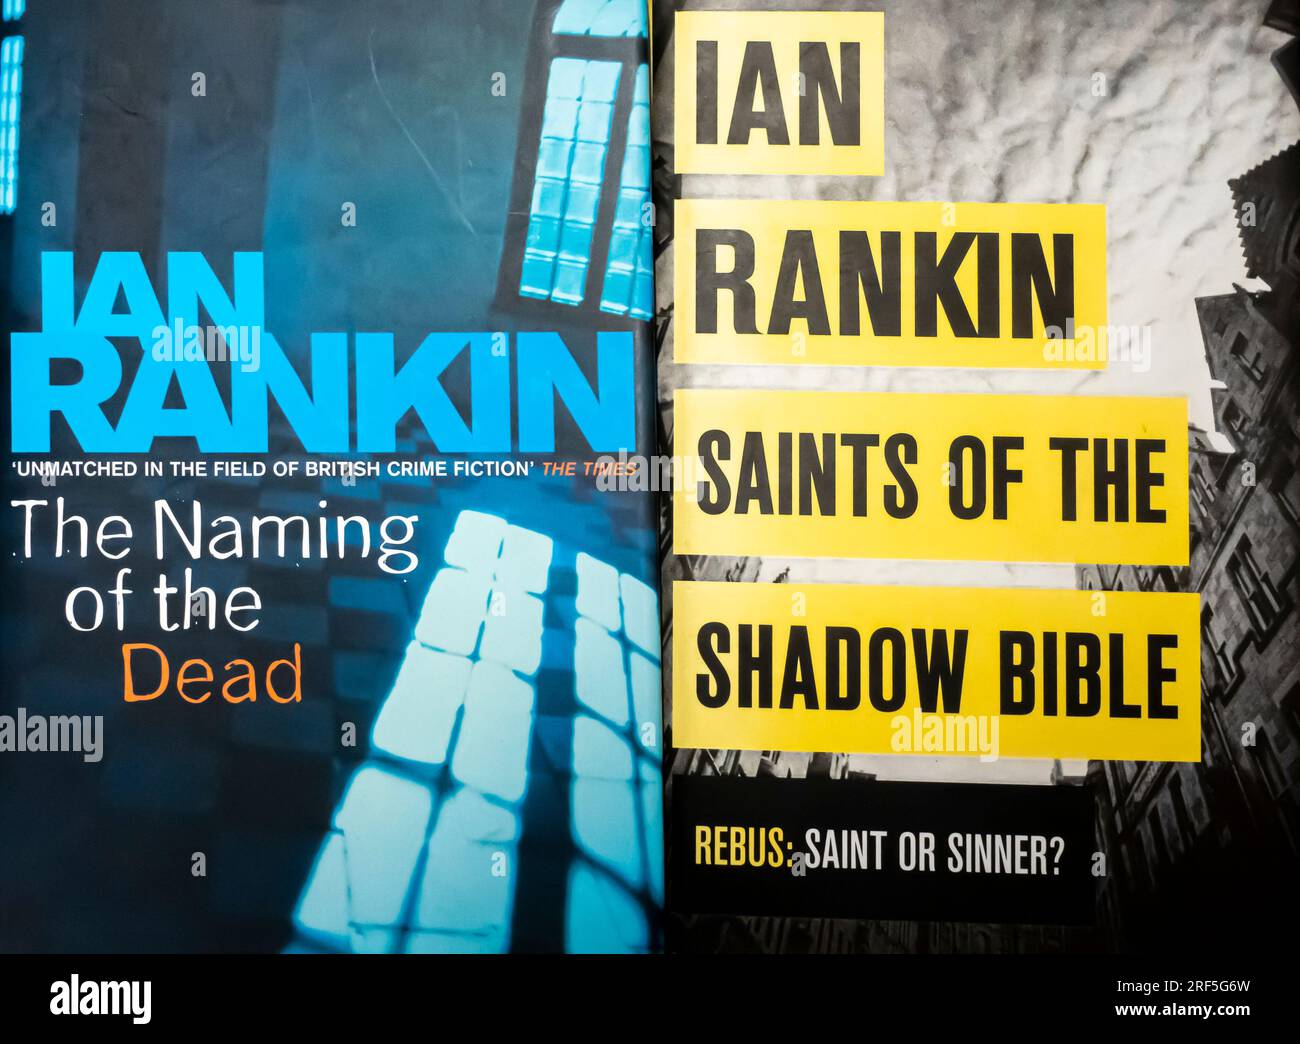 Ian Rankin Romane: The Naming of the Dead and Saints of the Shadow Bible - Rebus Romels Buchumschläge Stockfoto